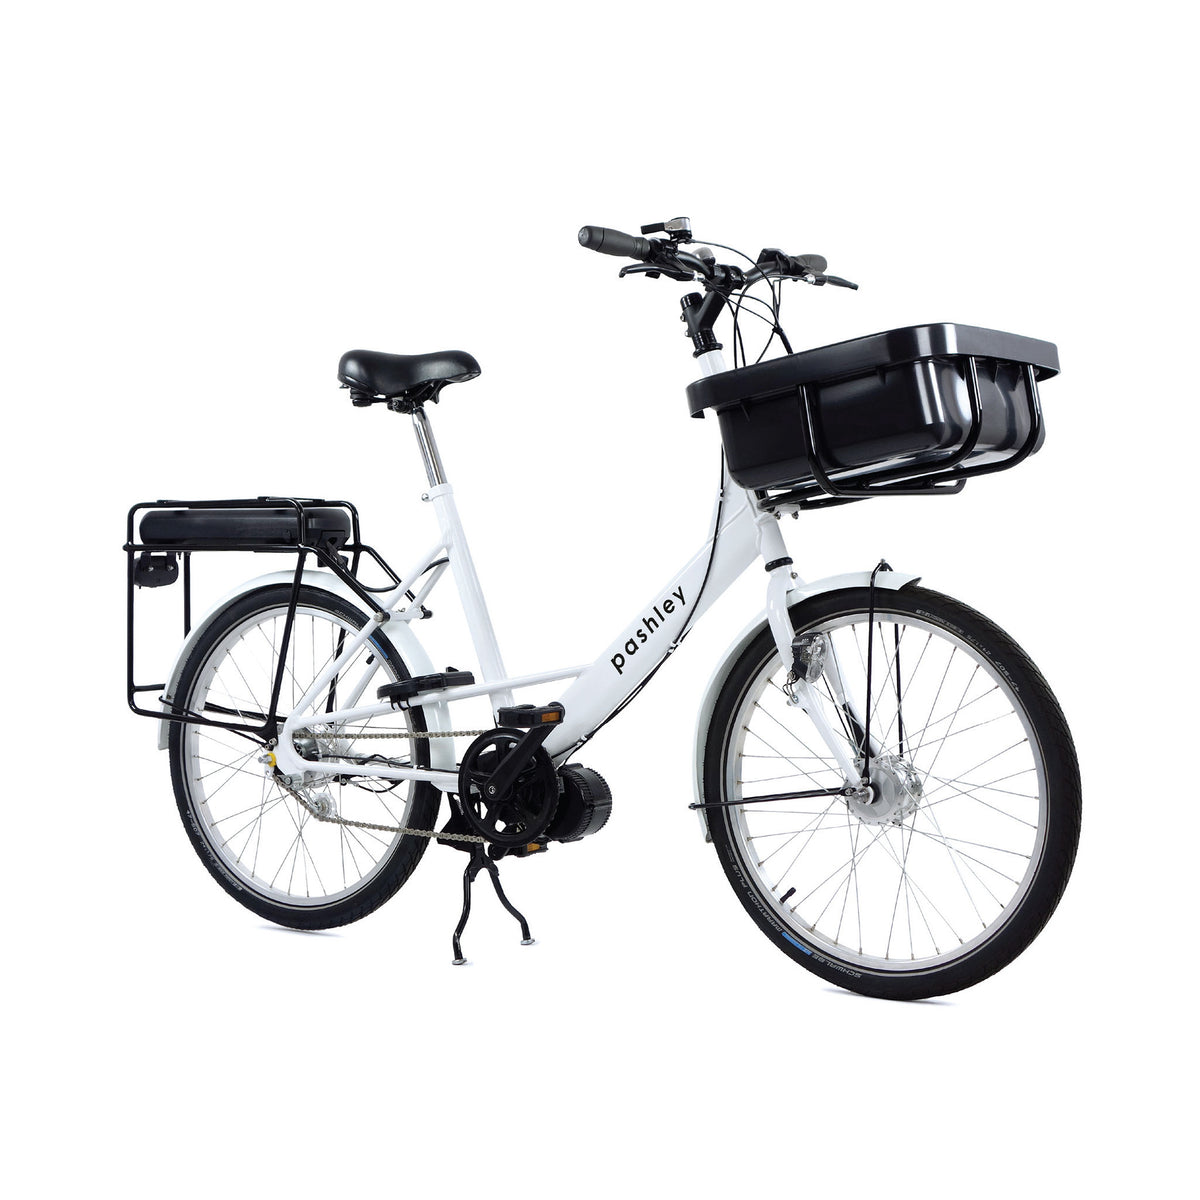 Front angle view of an electric cargo bike in white with front carry tray and rear rack.